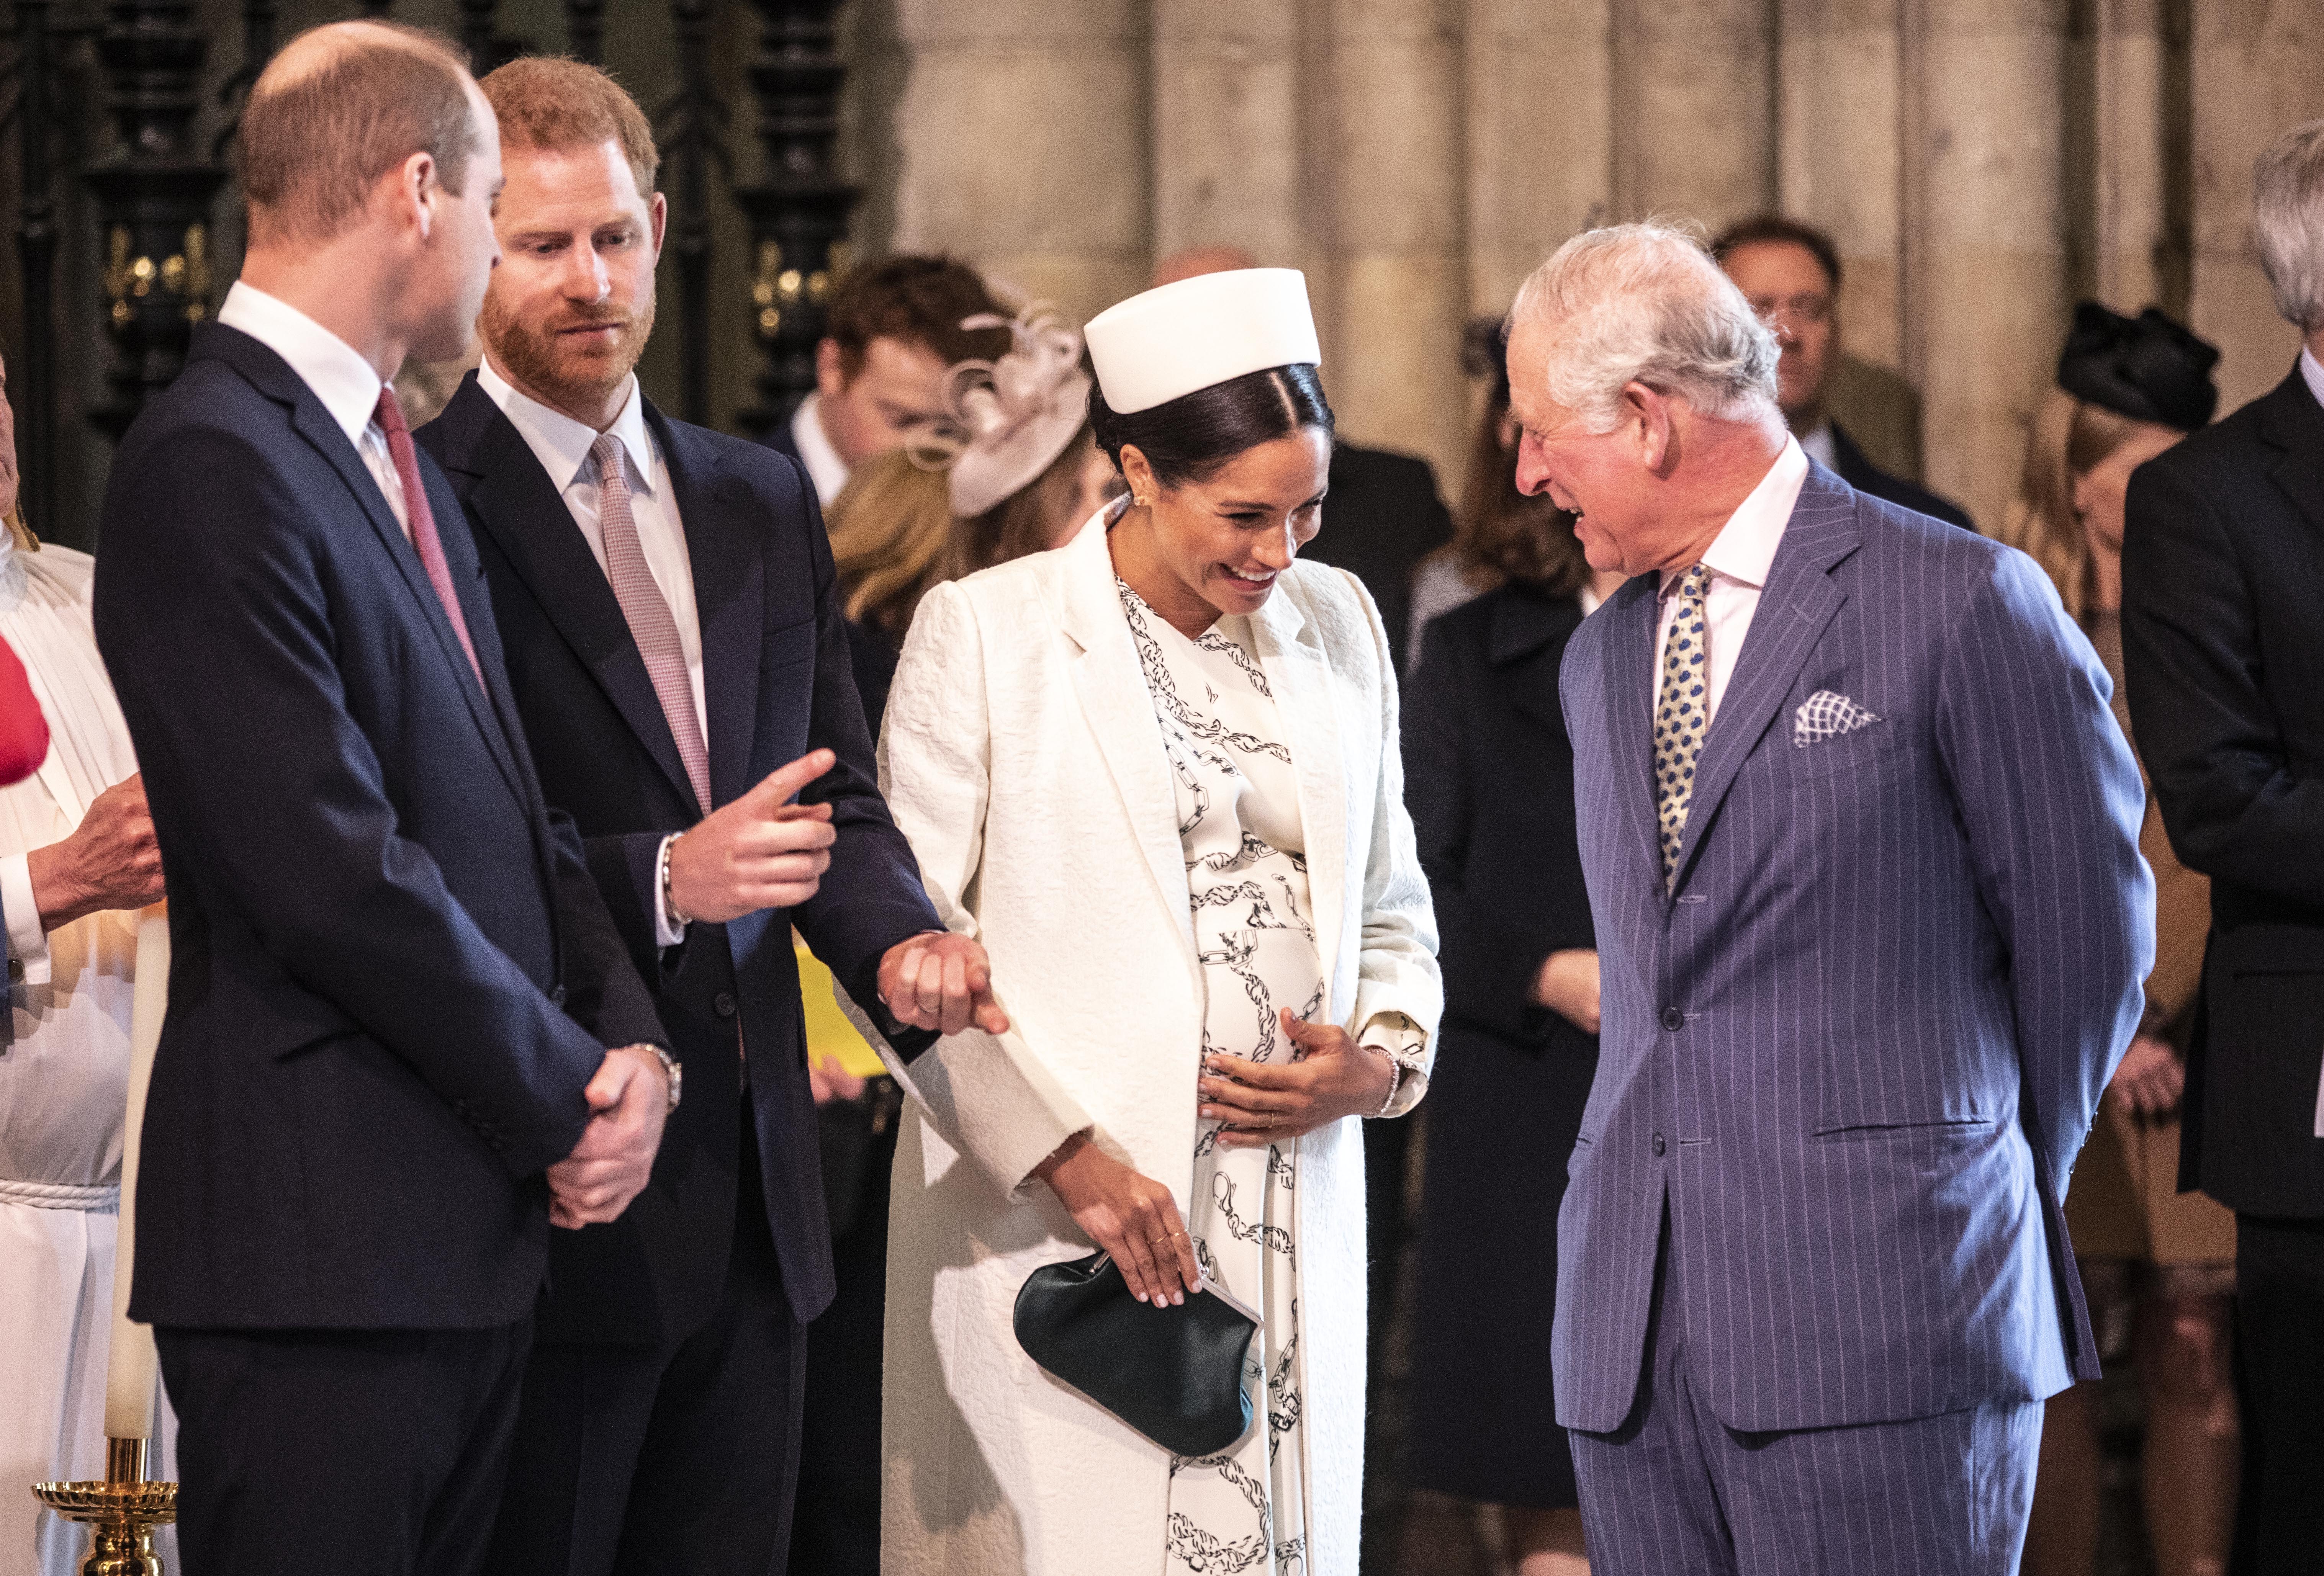 Meghan Markle talks with Prince Charles at the Westminster Abbey Commonwealth day service on March 11, 2019 in London, England | Photo: Getty Images